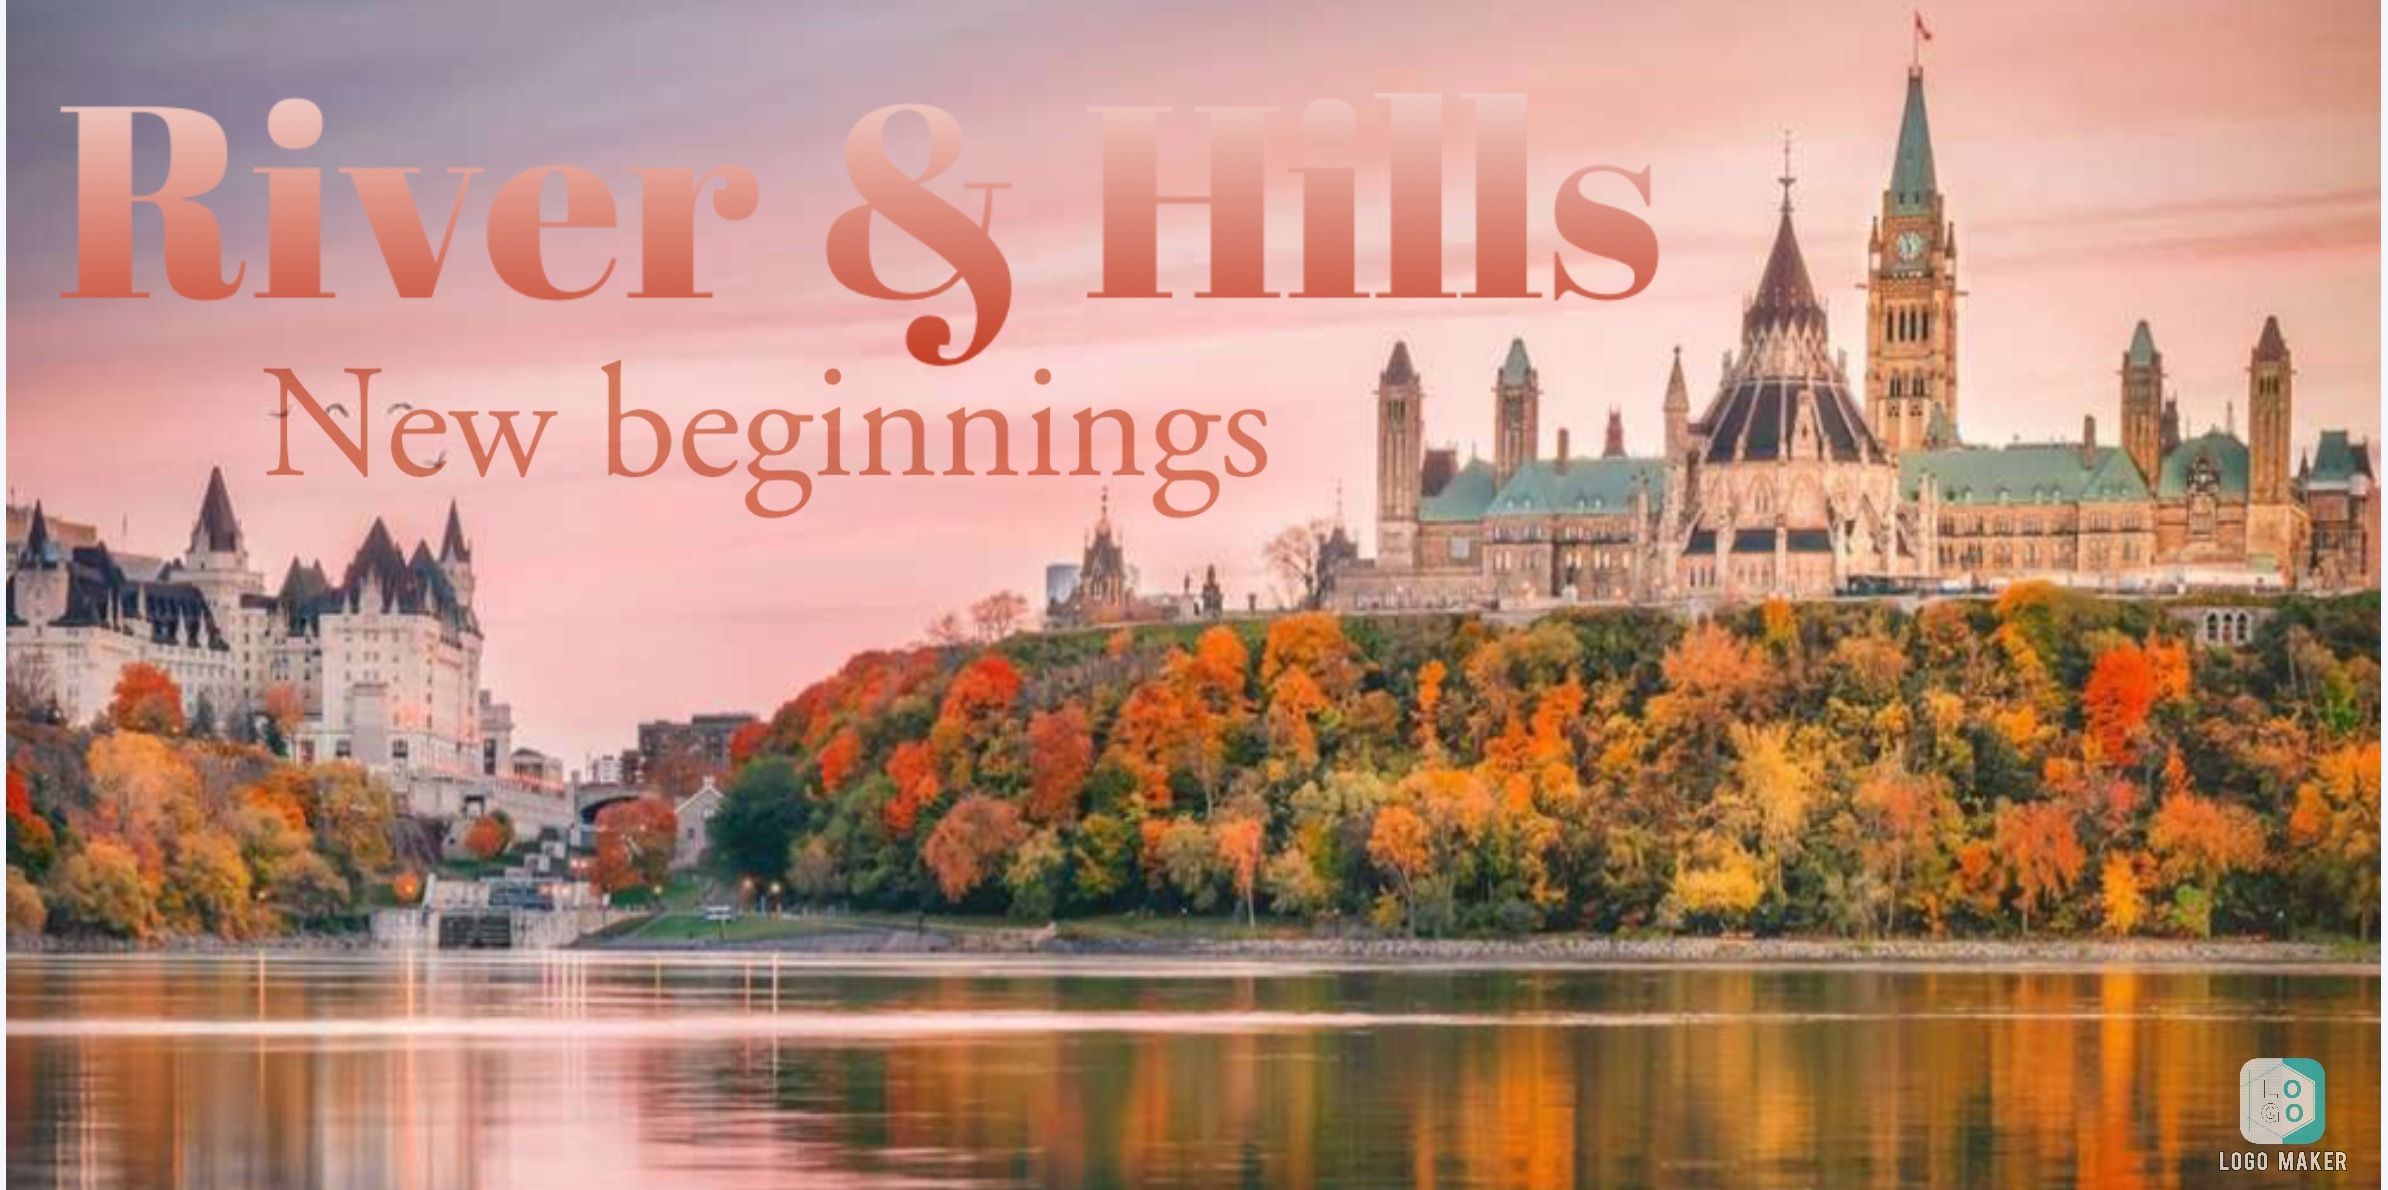 River and Hills, new beginnings